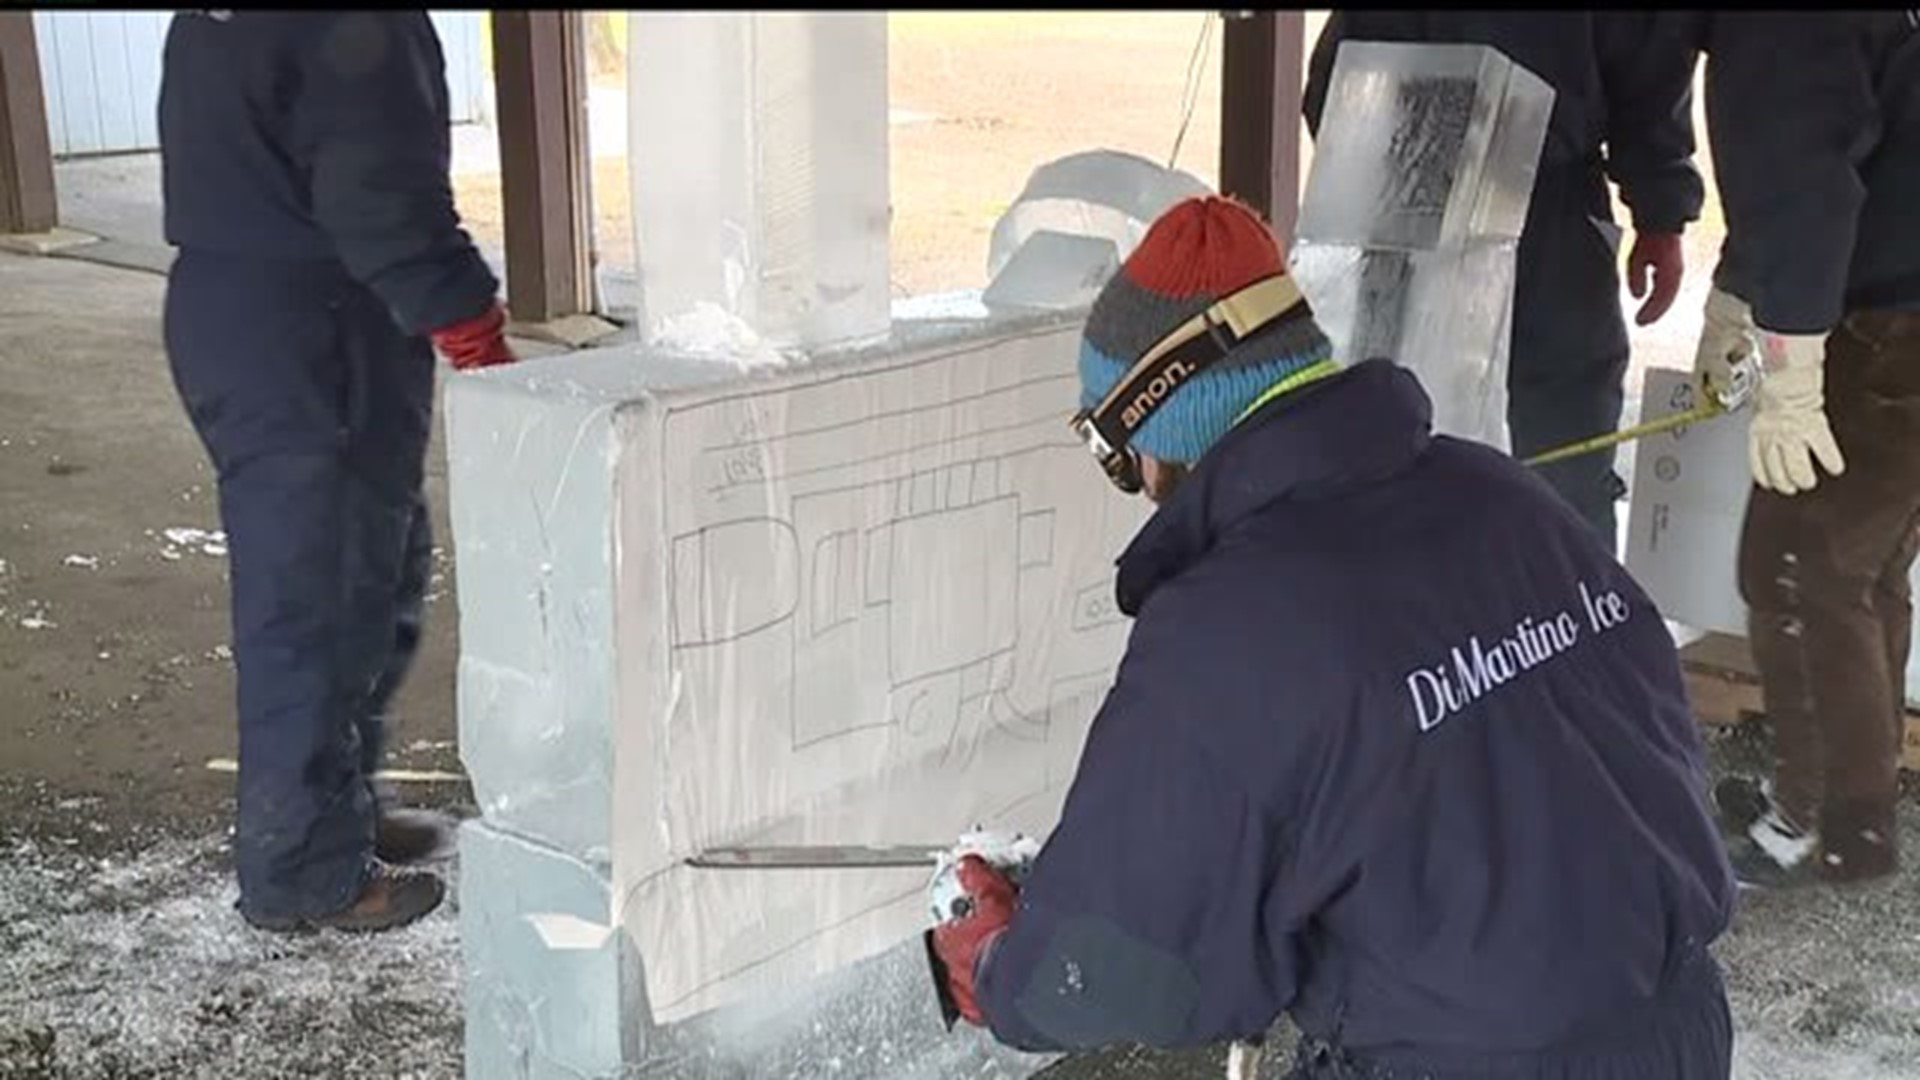 LITITZ FIRE AND ICE FEST WARM WEEKEND